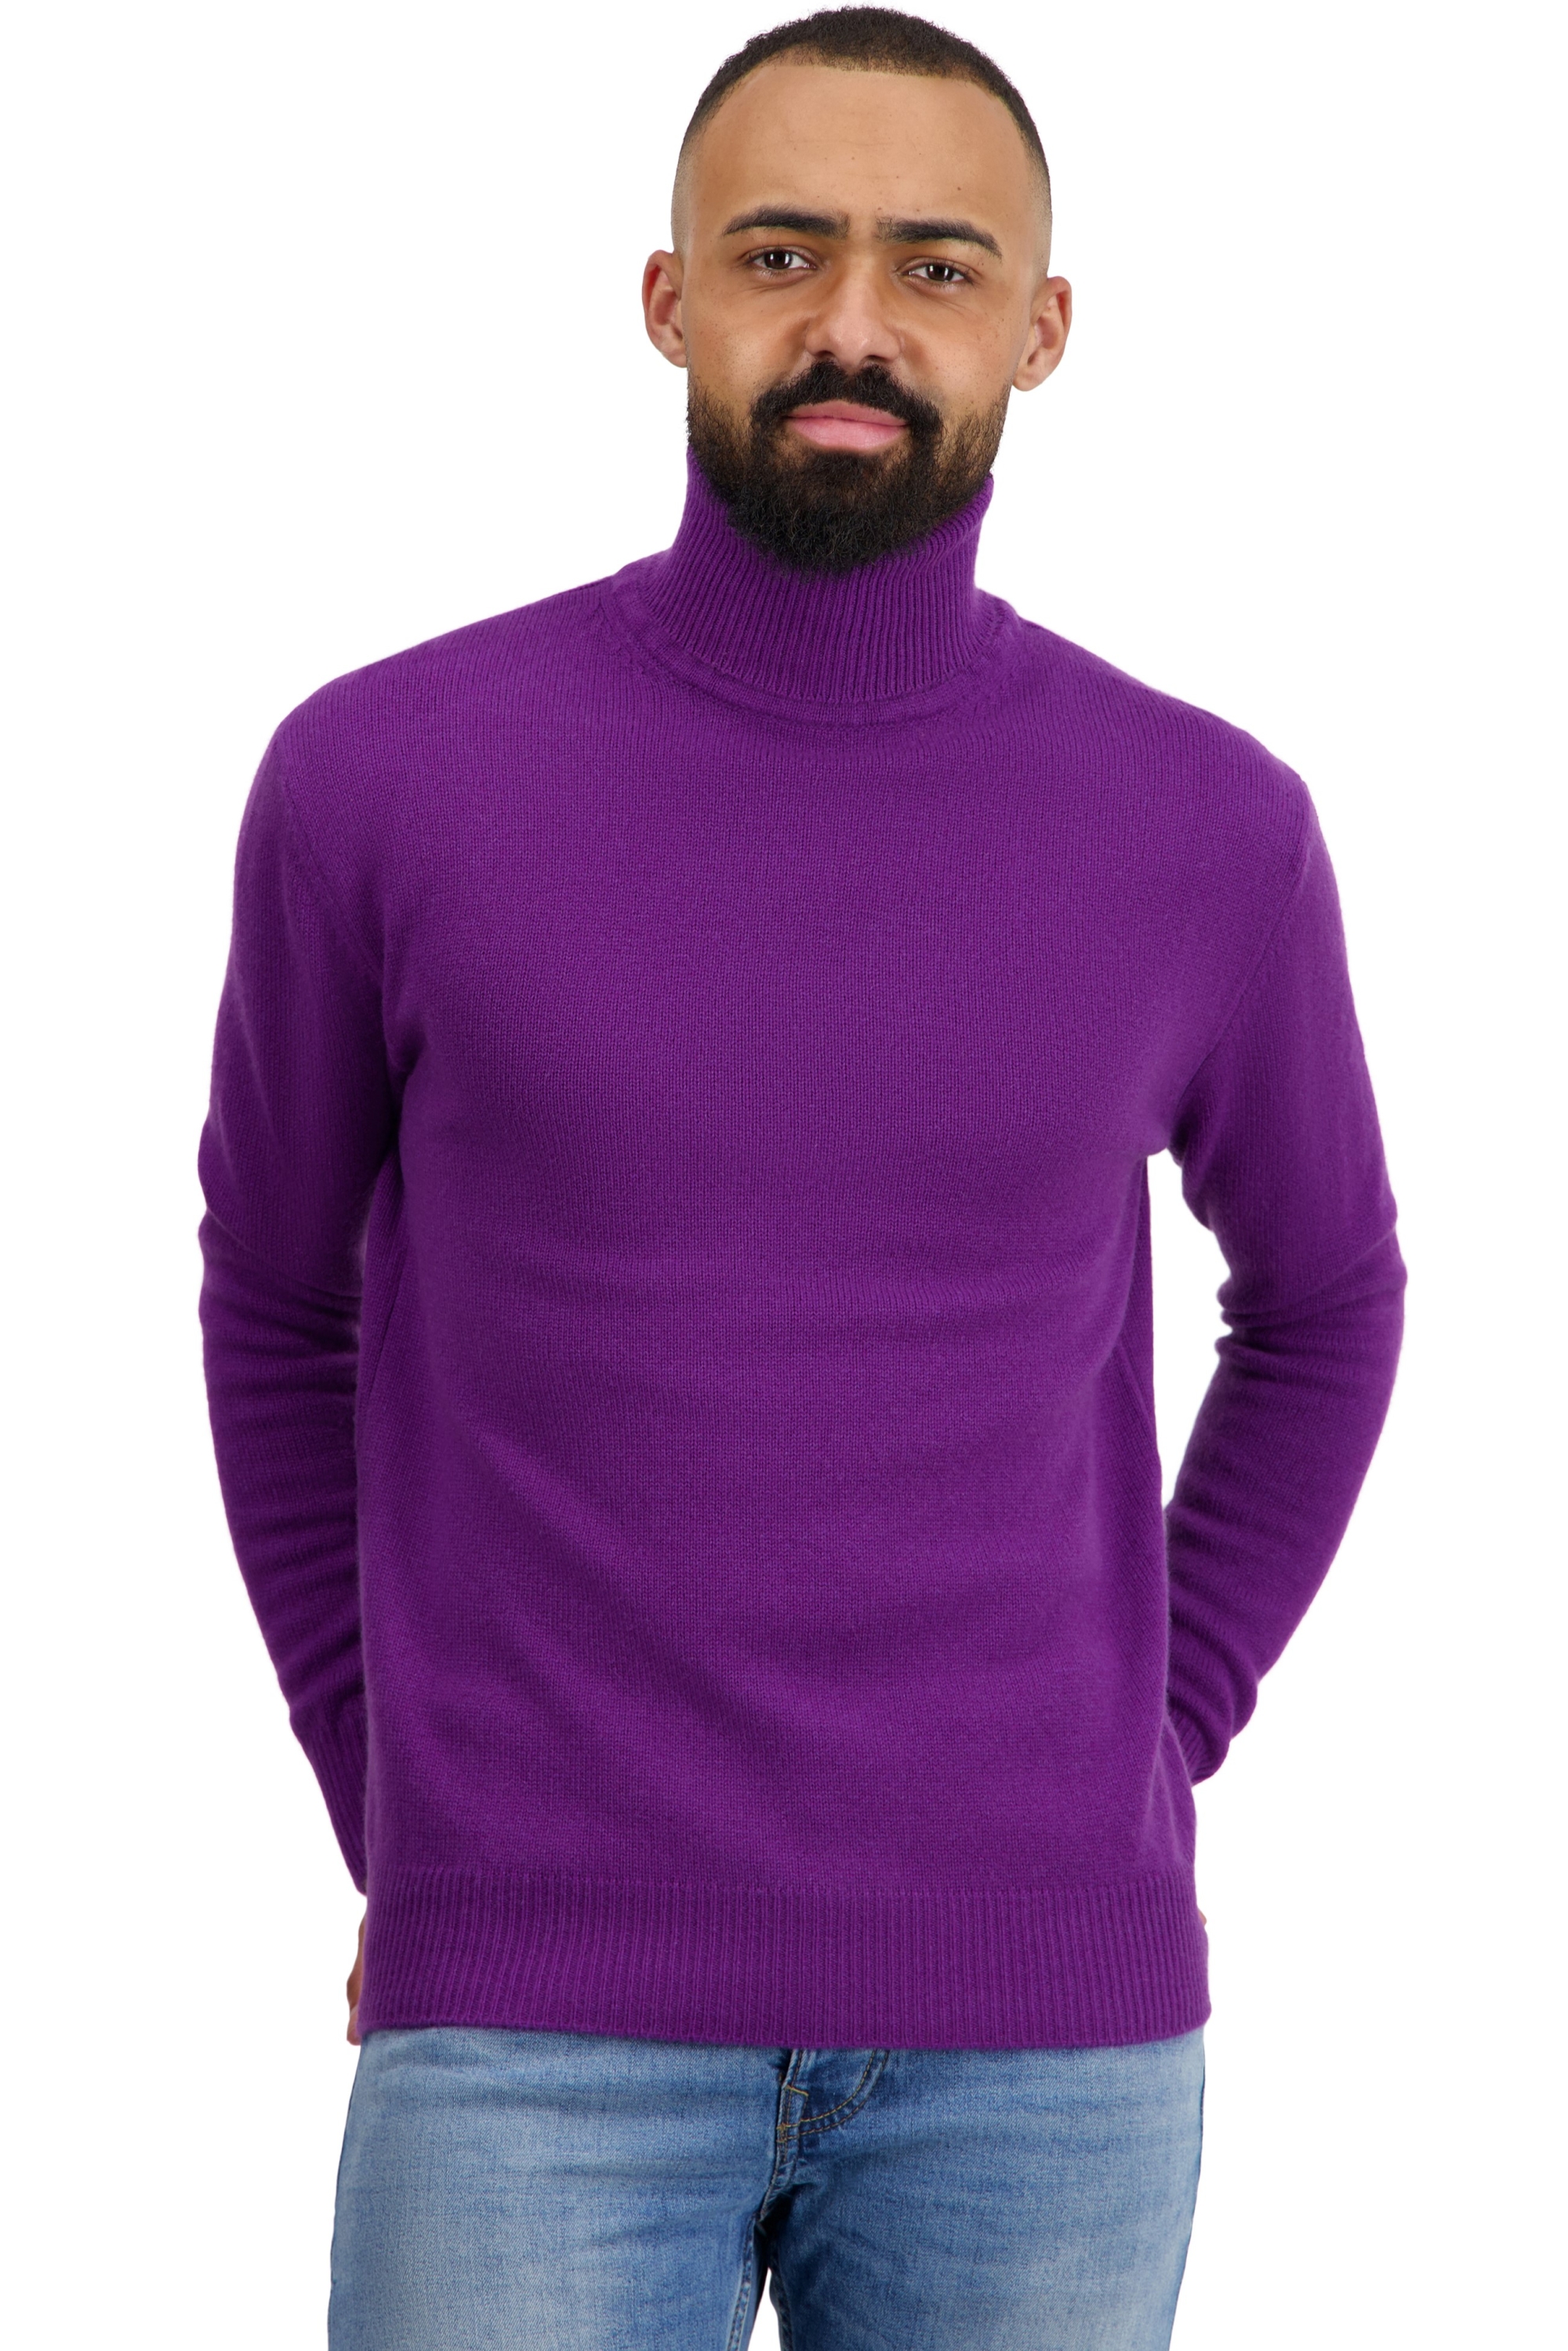 Cashmere men basic sweaters at low prices torino first regalia m